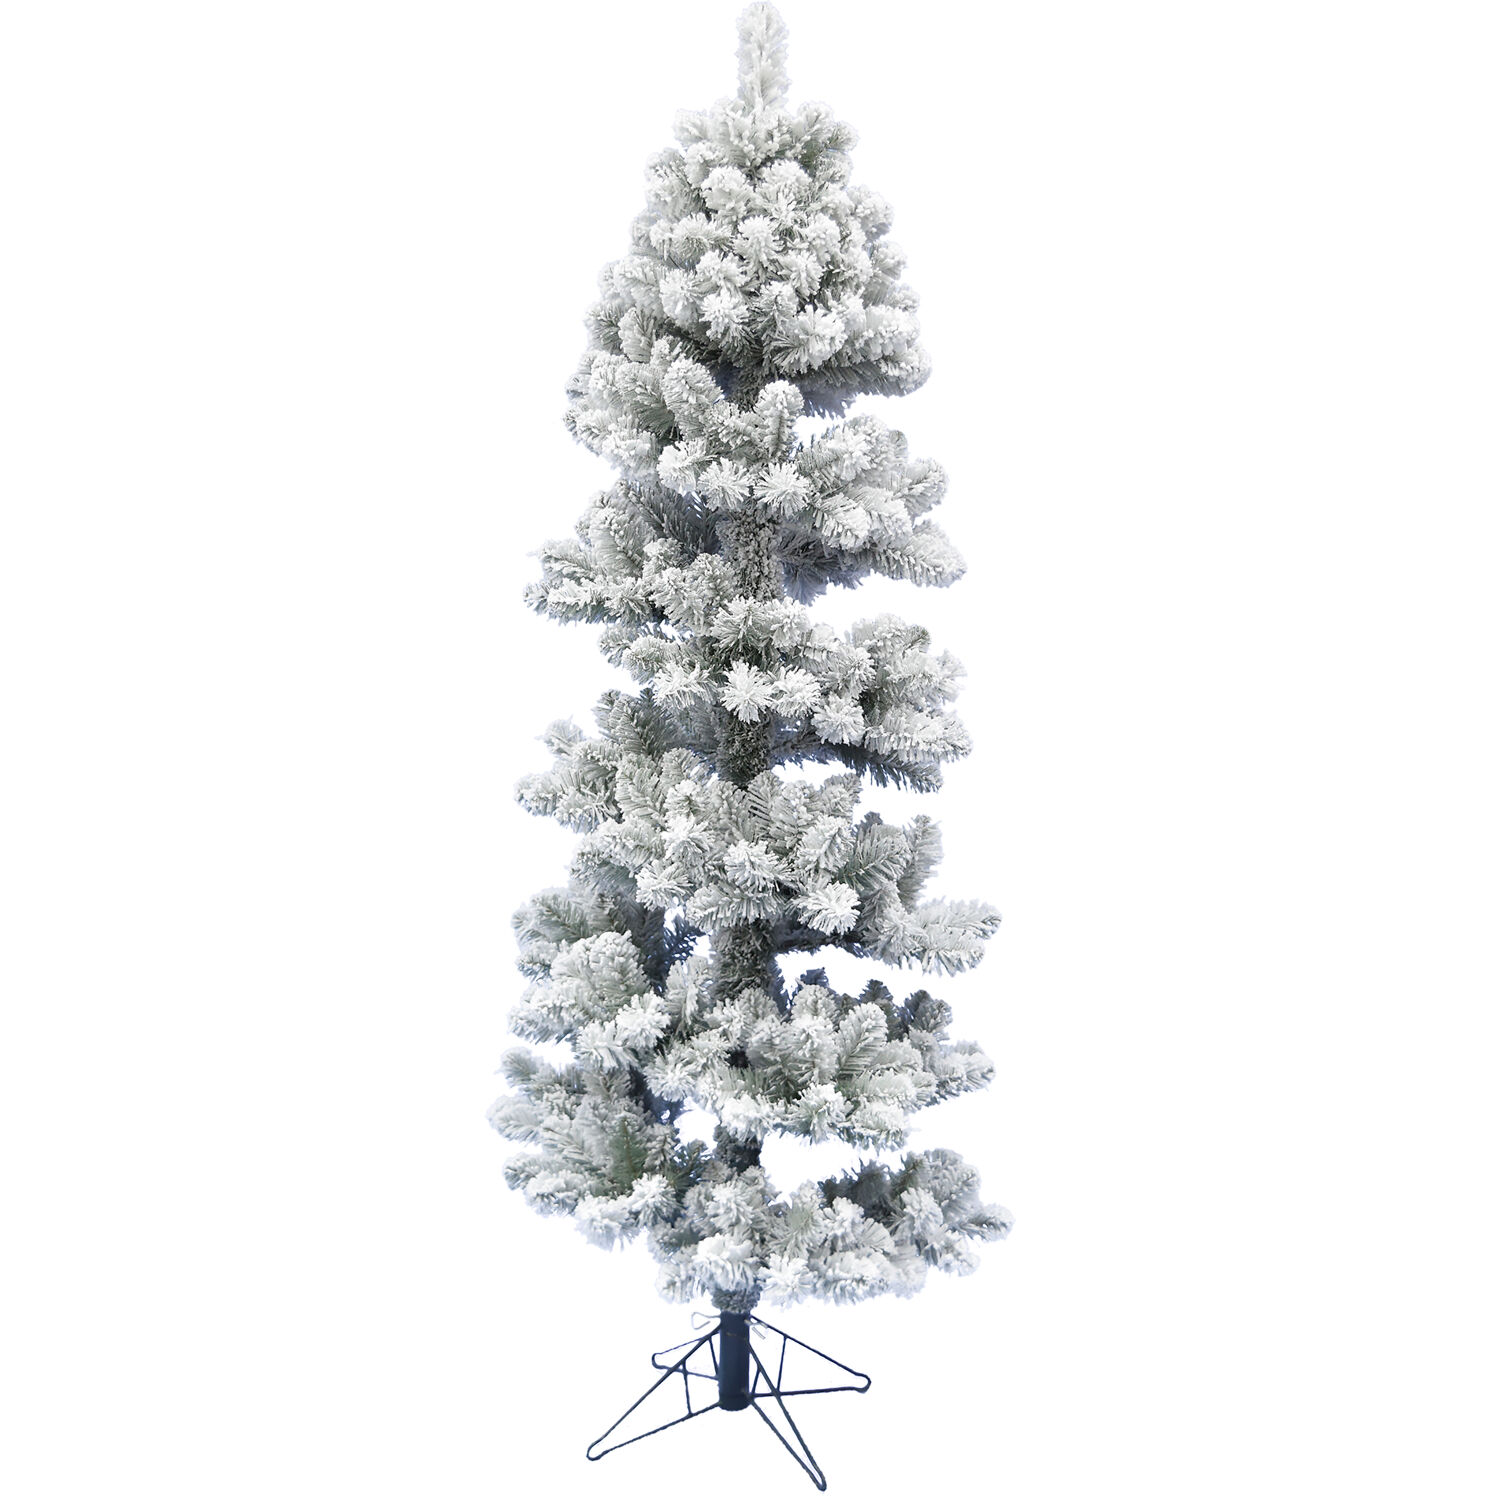 Fraser Hill Farm 6-Ft Snowy Spiral Porch Tree in Metal Base, No lights - image 1 of 6